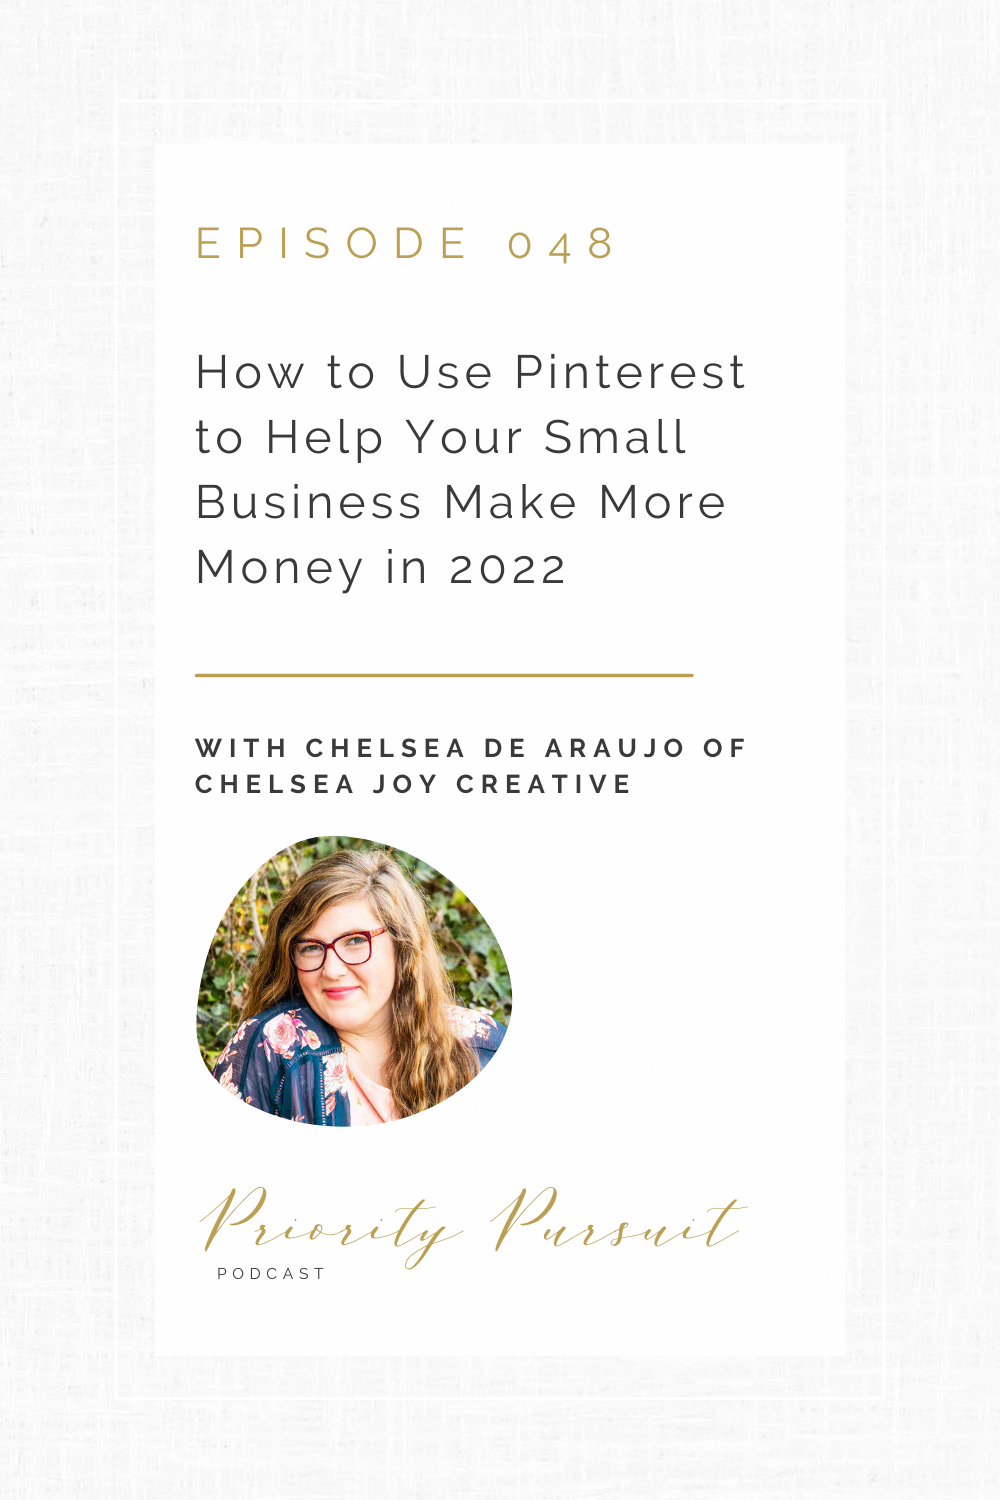 Victoria Rayburn and Chelsea de Araujo discuss how to use pinterest to help your small business make more money in 2022